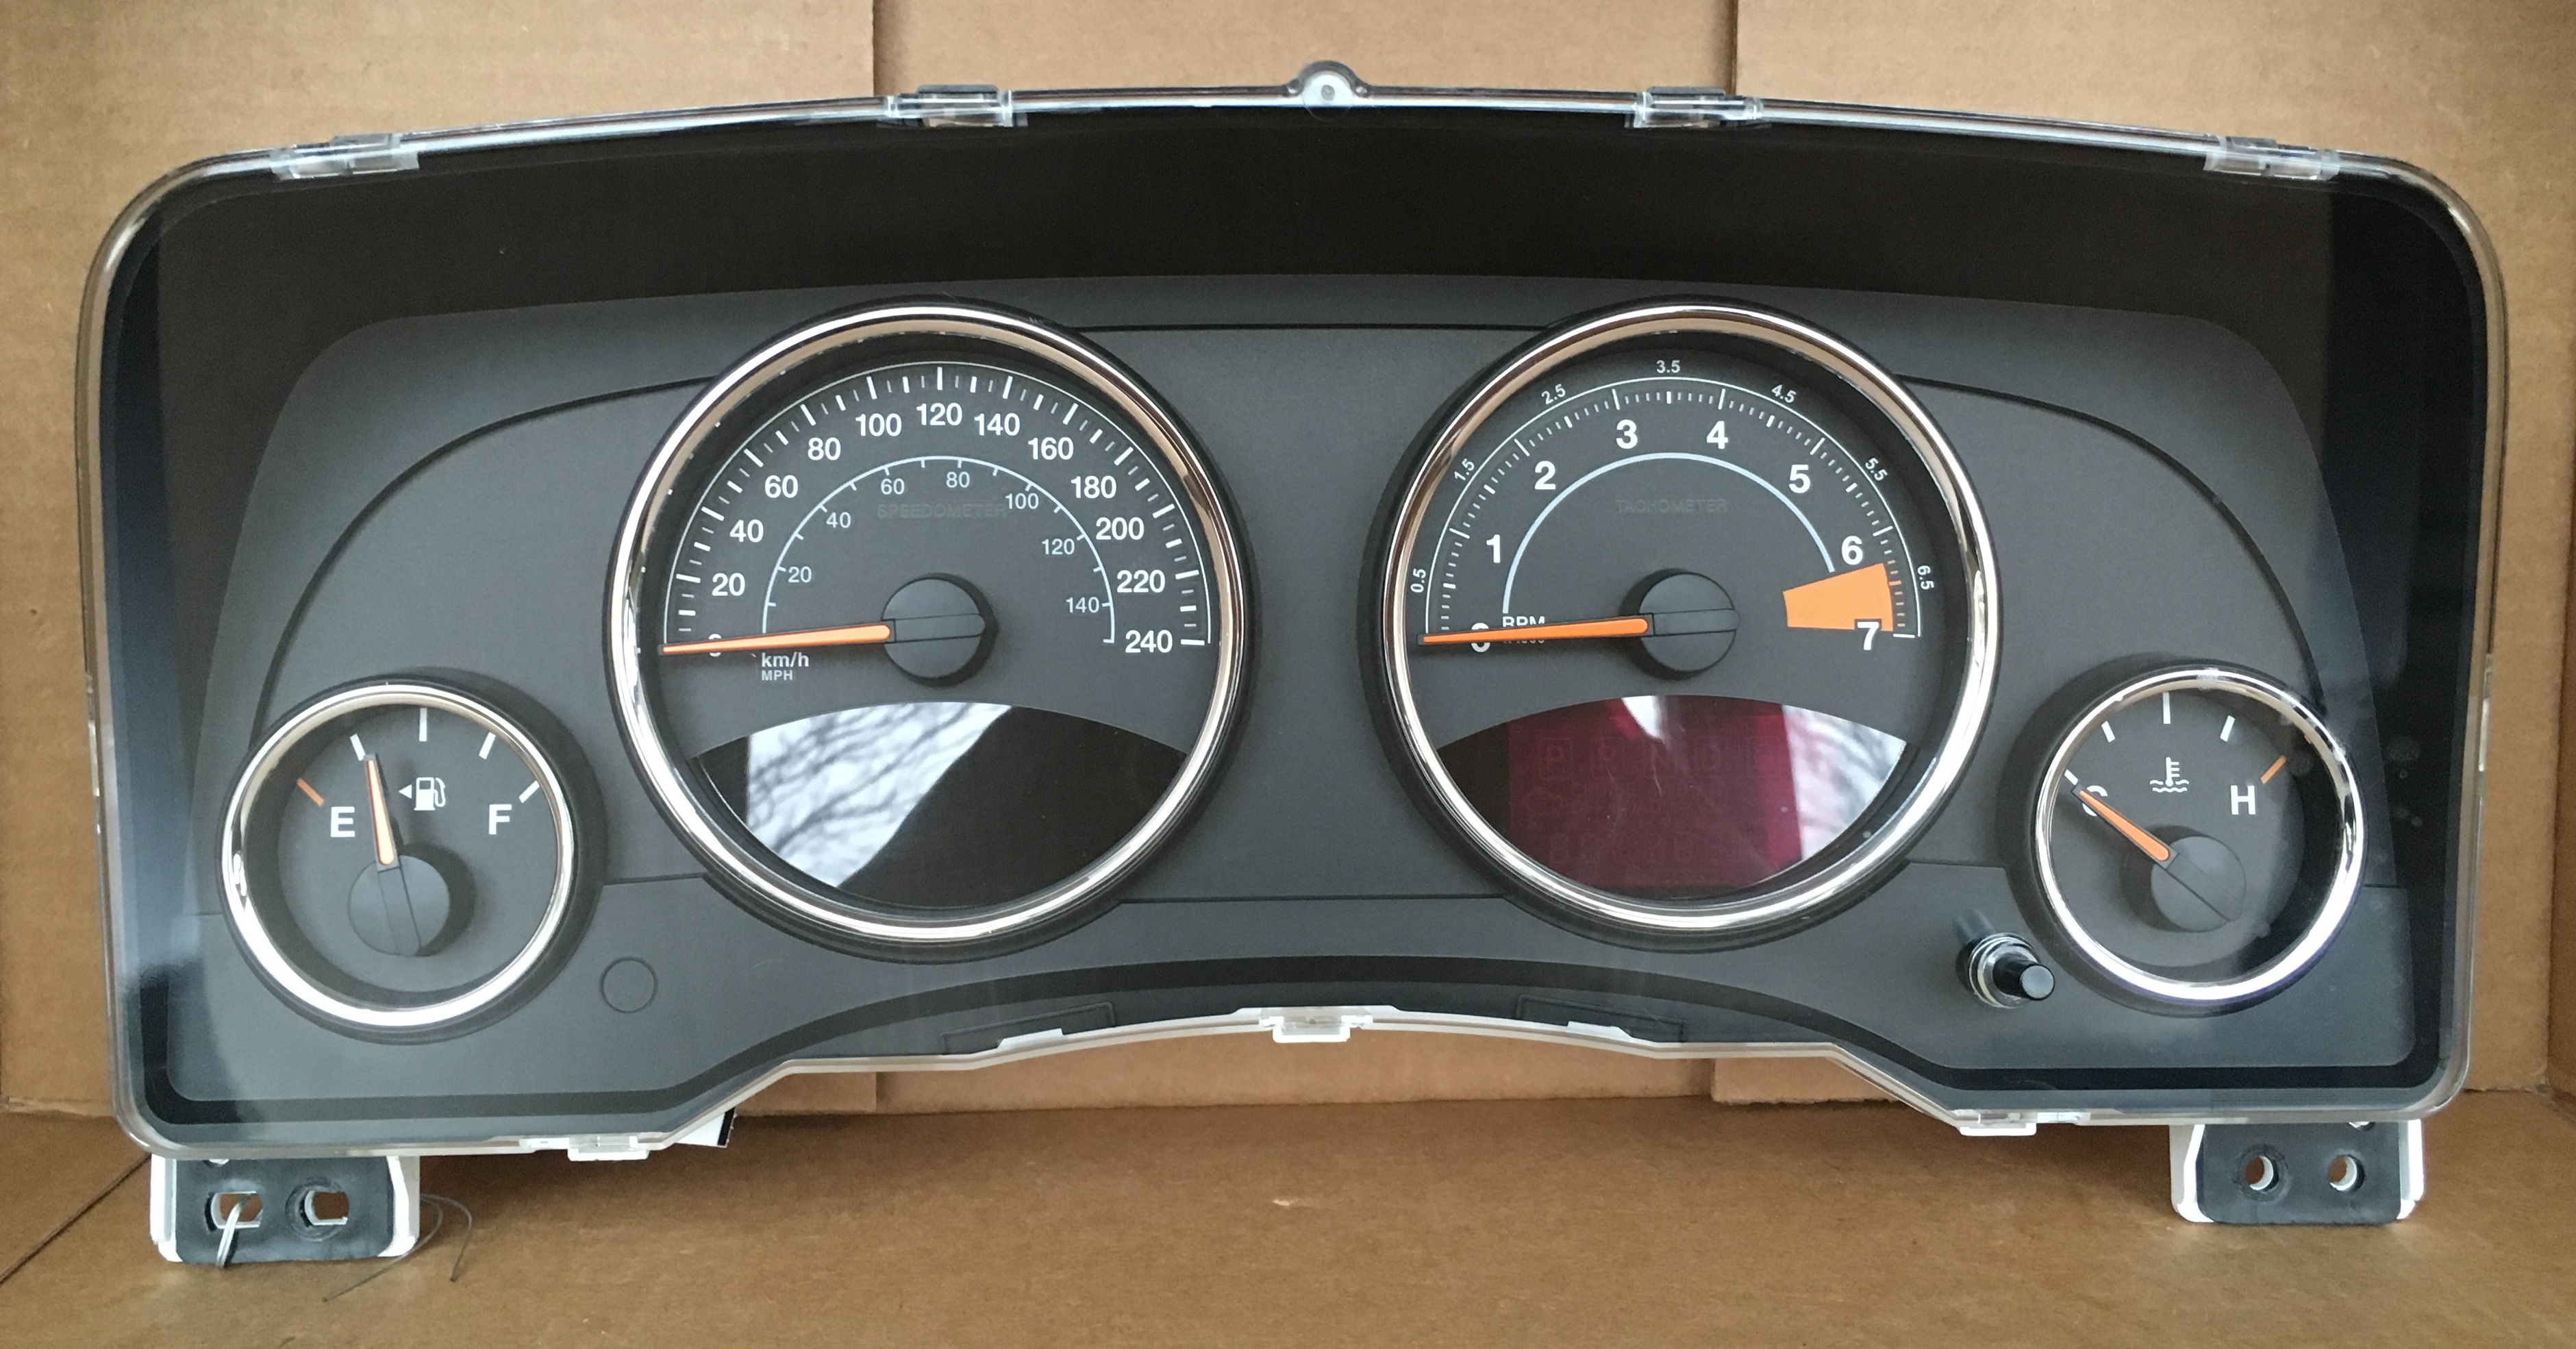 2016 JEEP COMPASS USED DASHBOARD INSTRUMENT CLUSTER FOR ...